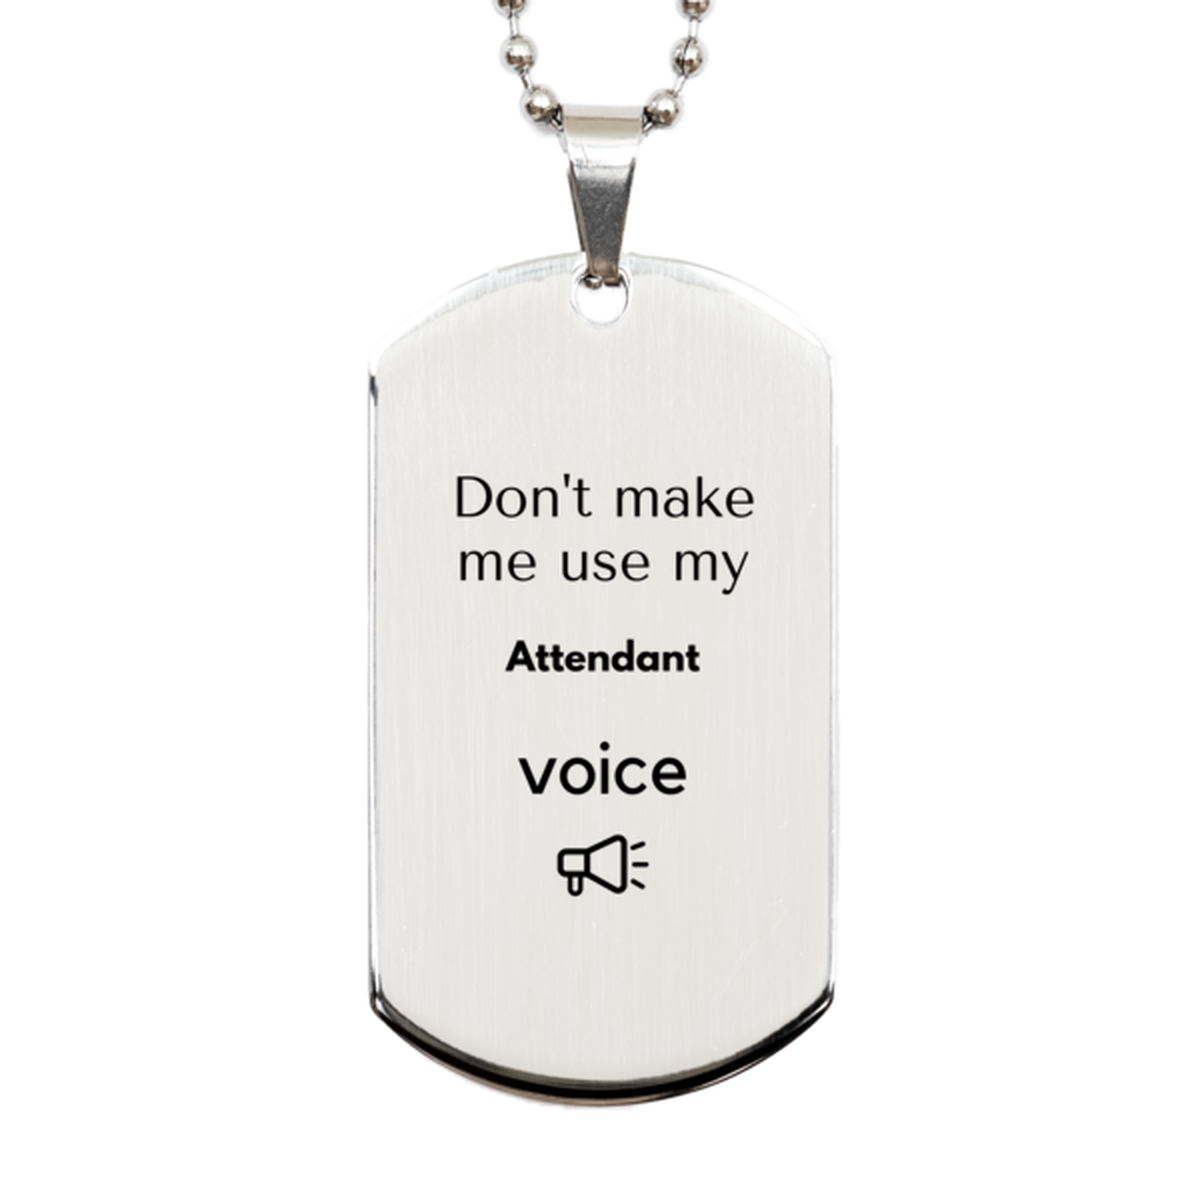 Don't make me use my Attendant voice, Sarcasm Attendant Gifts, Christmas Attendant Silver Dog Tag Birthday Unique Gifts For Attendant Coworkers, Men, Women, Colleague, Friends